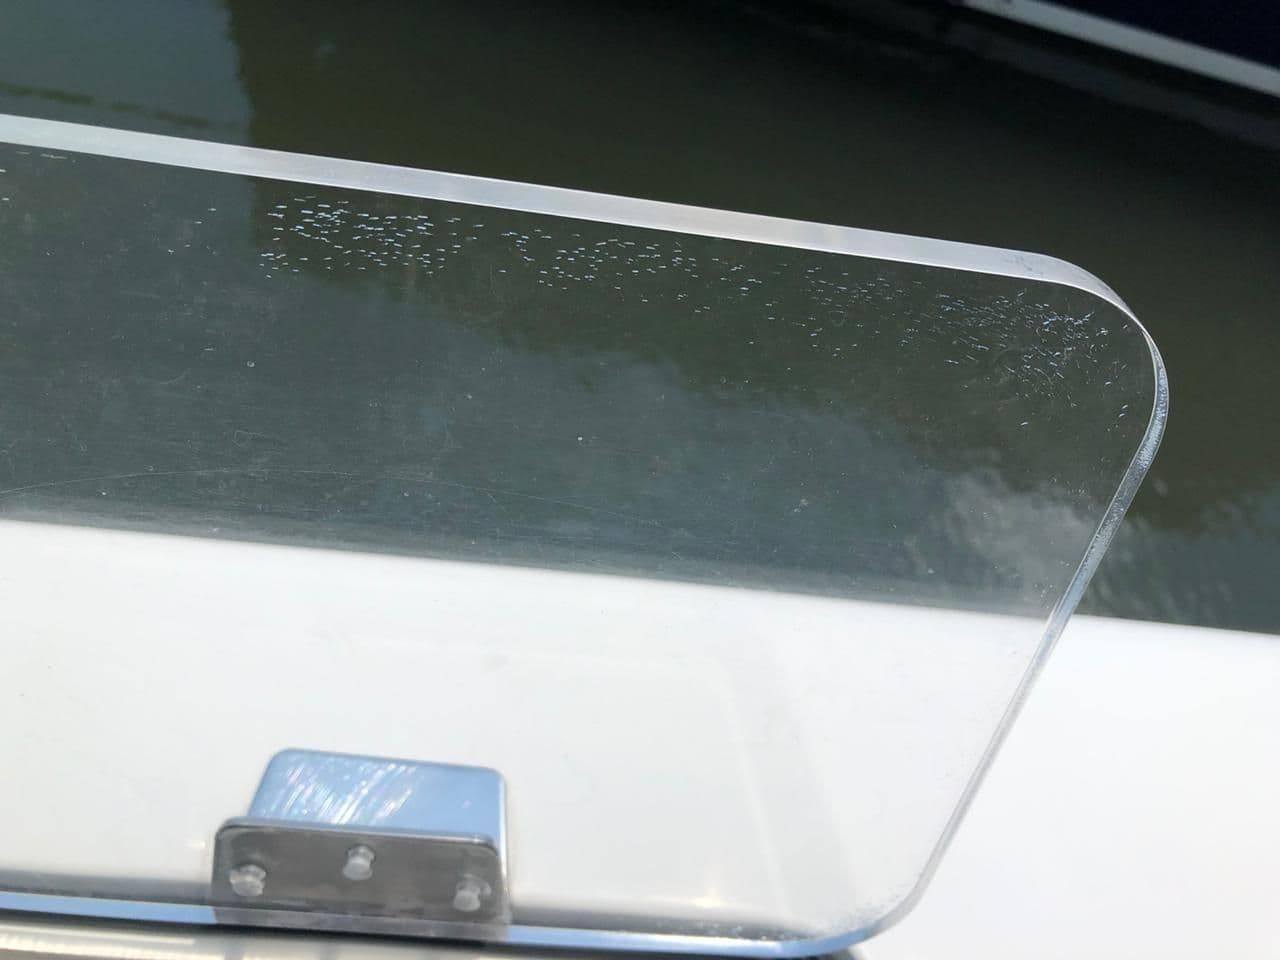 Live Bait Tank Acrylic Lid - How to Protect? - The Hull Truth - Boating and  Fishing Forum